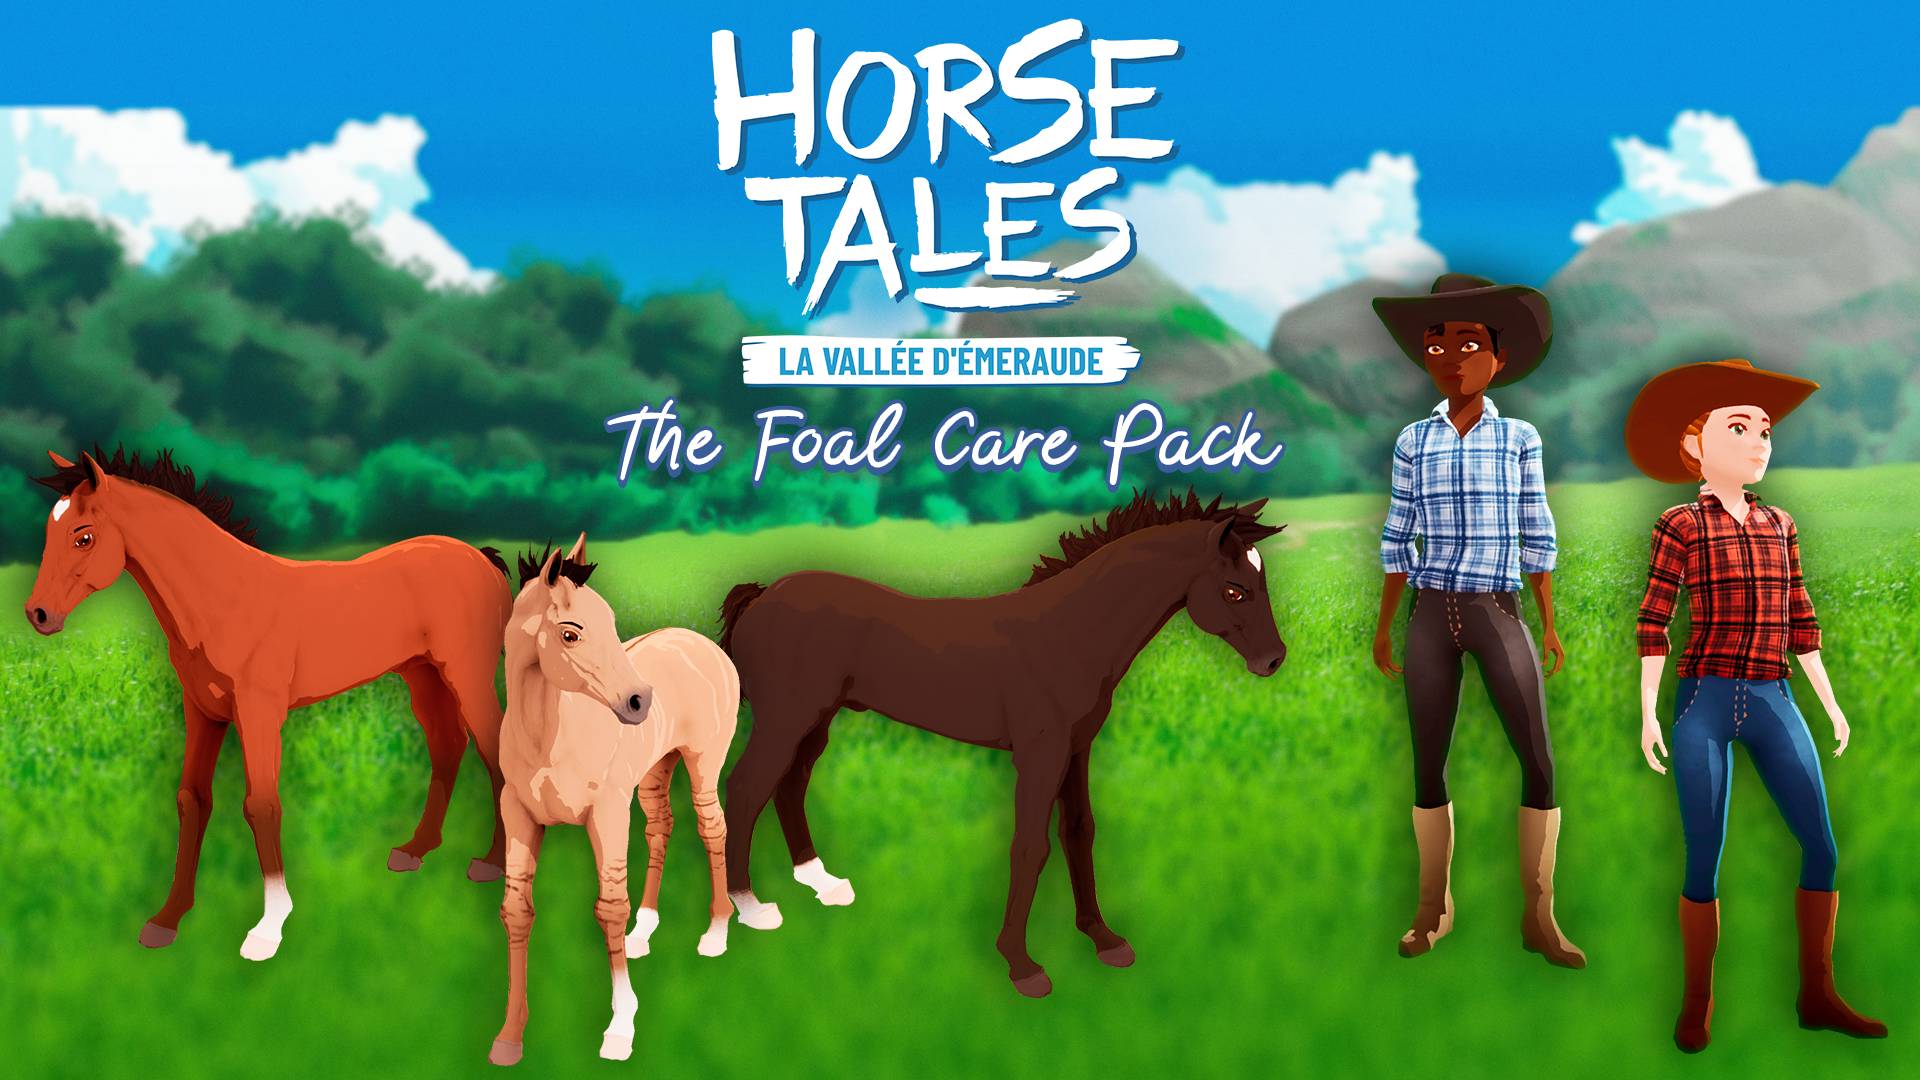 The Foal Care Pack